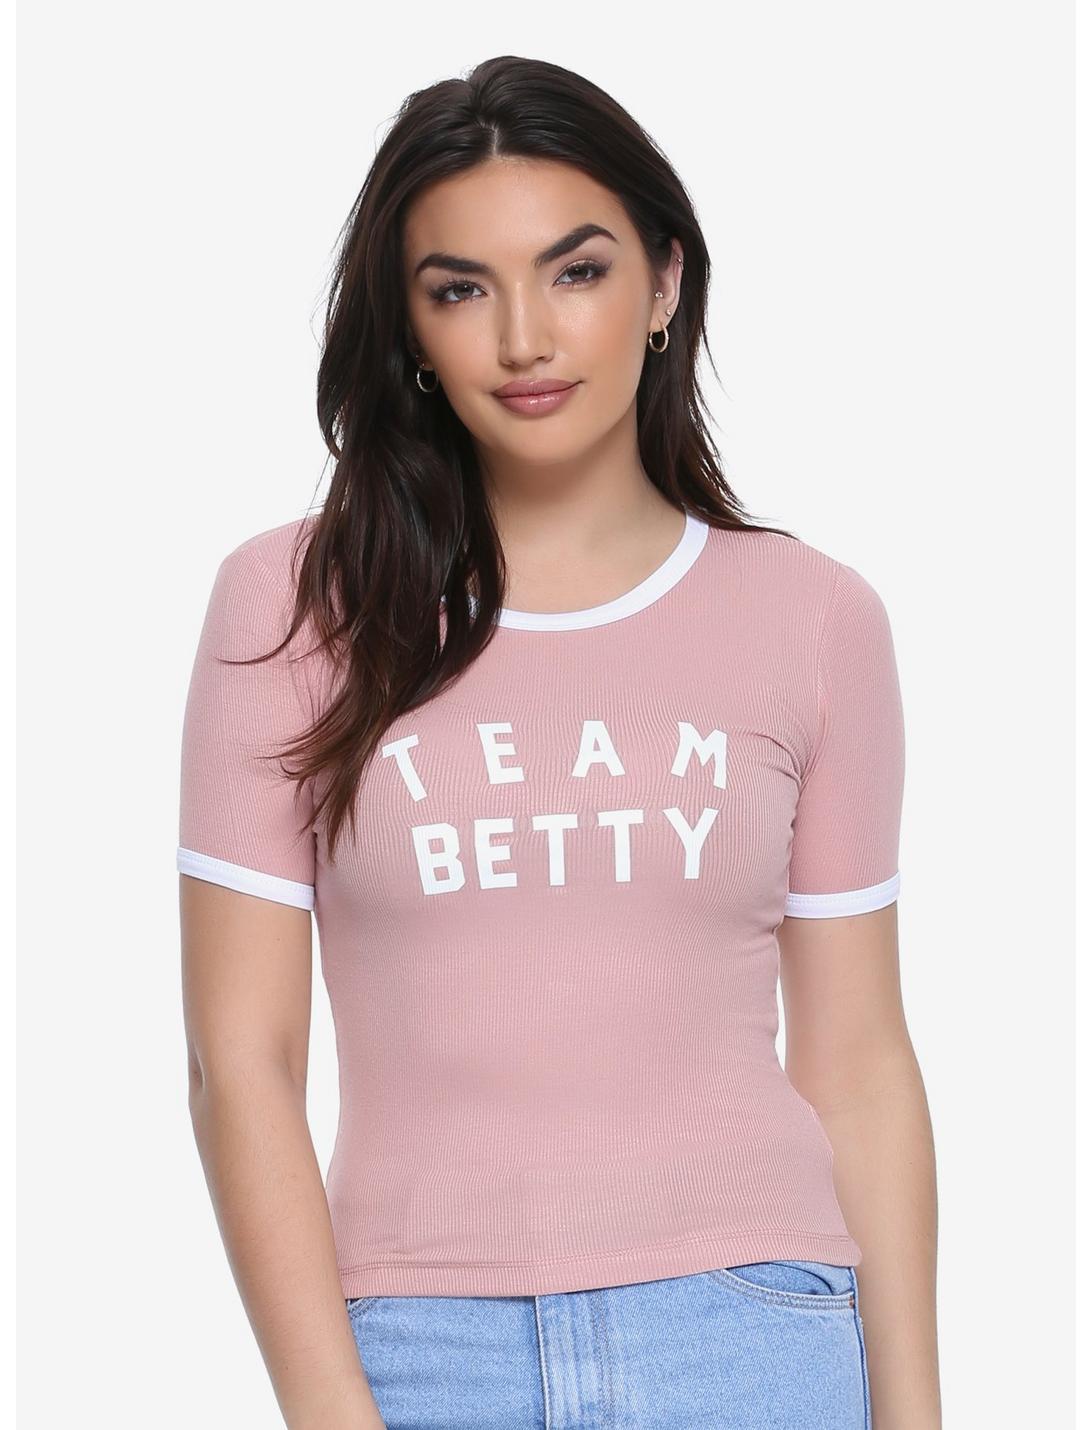 Archie Comics Betty & Veronica Team Betty Womens Ringer Tee, PINK, hi-res